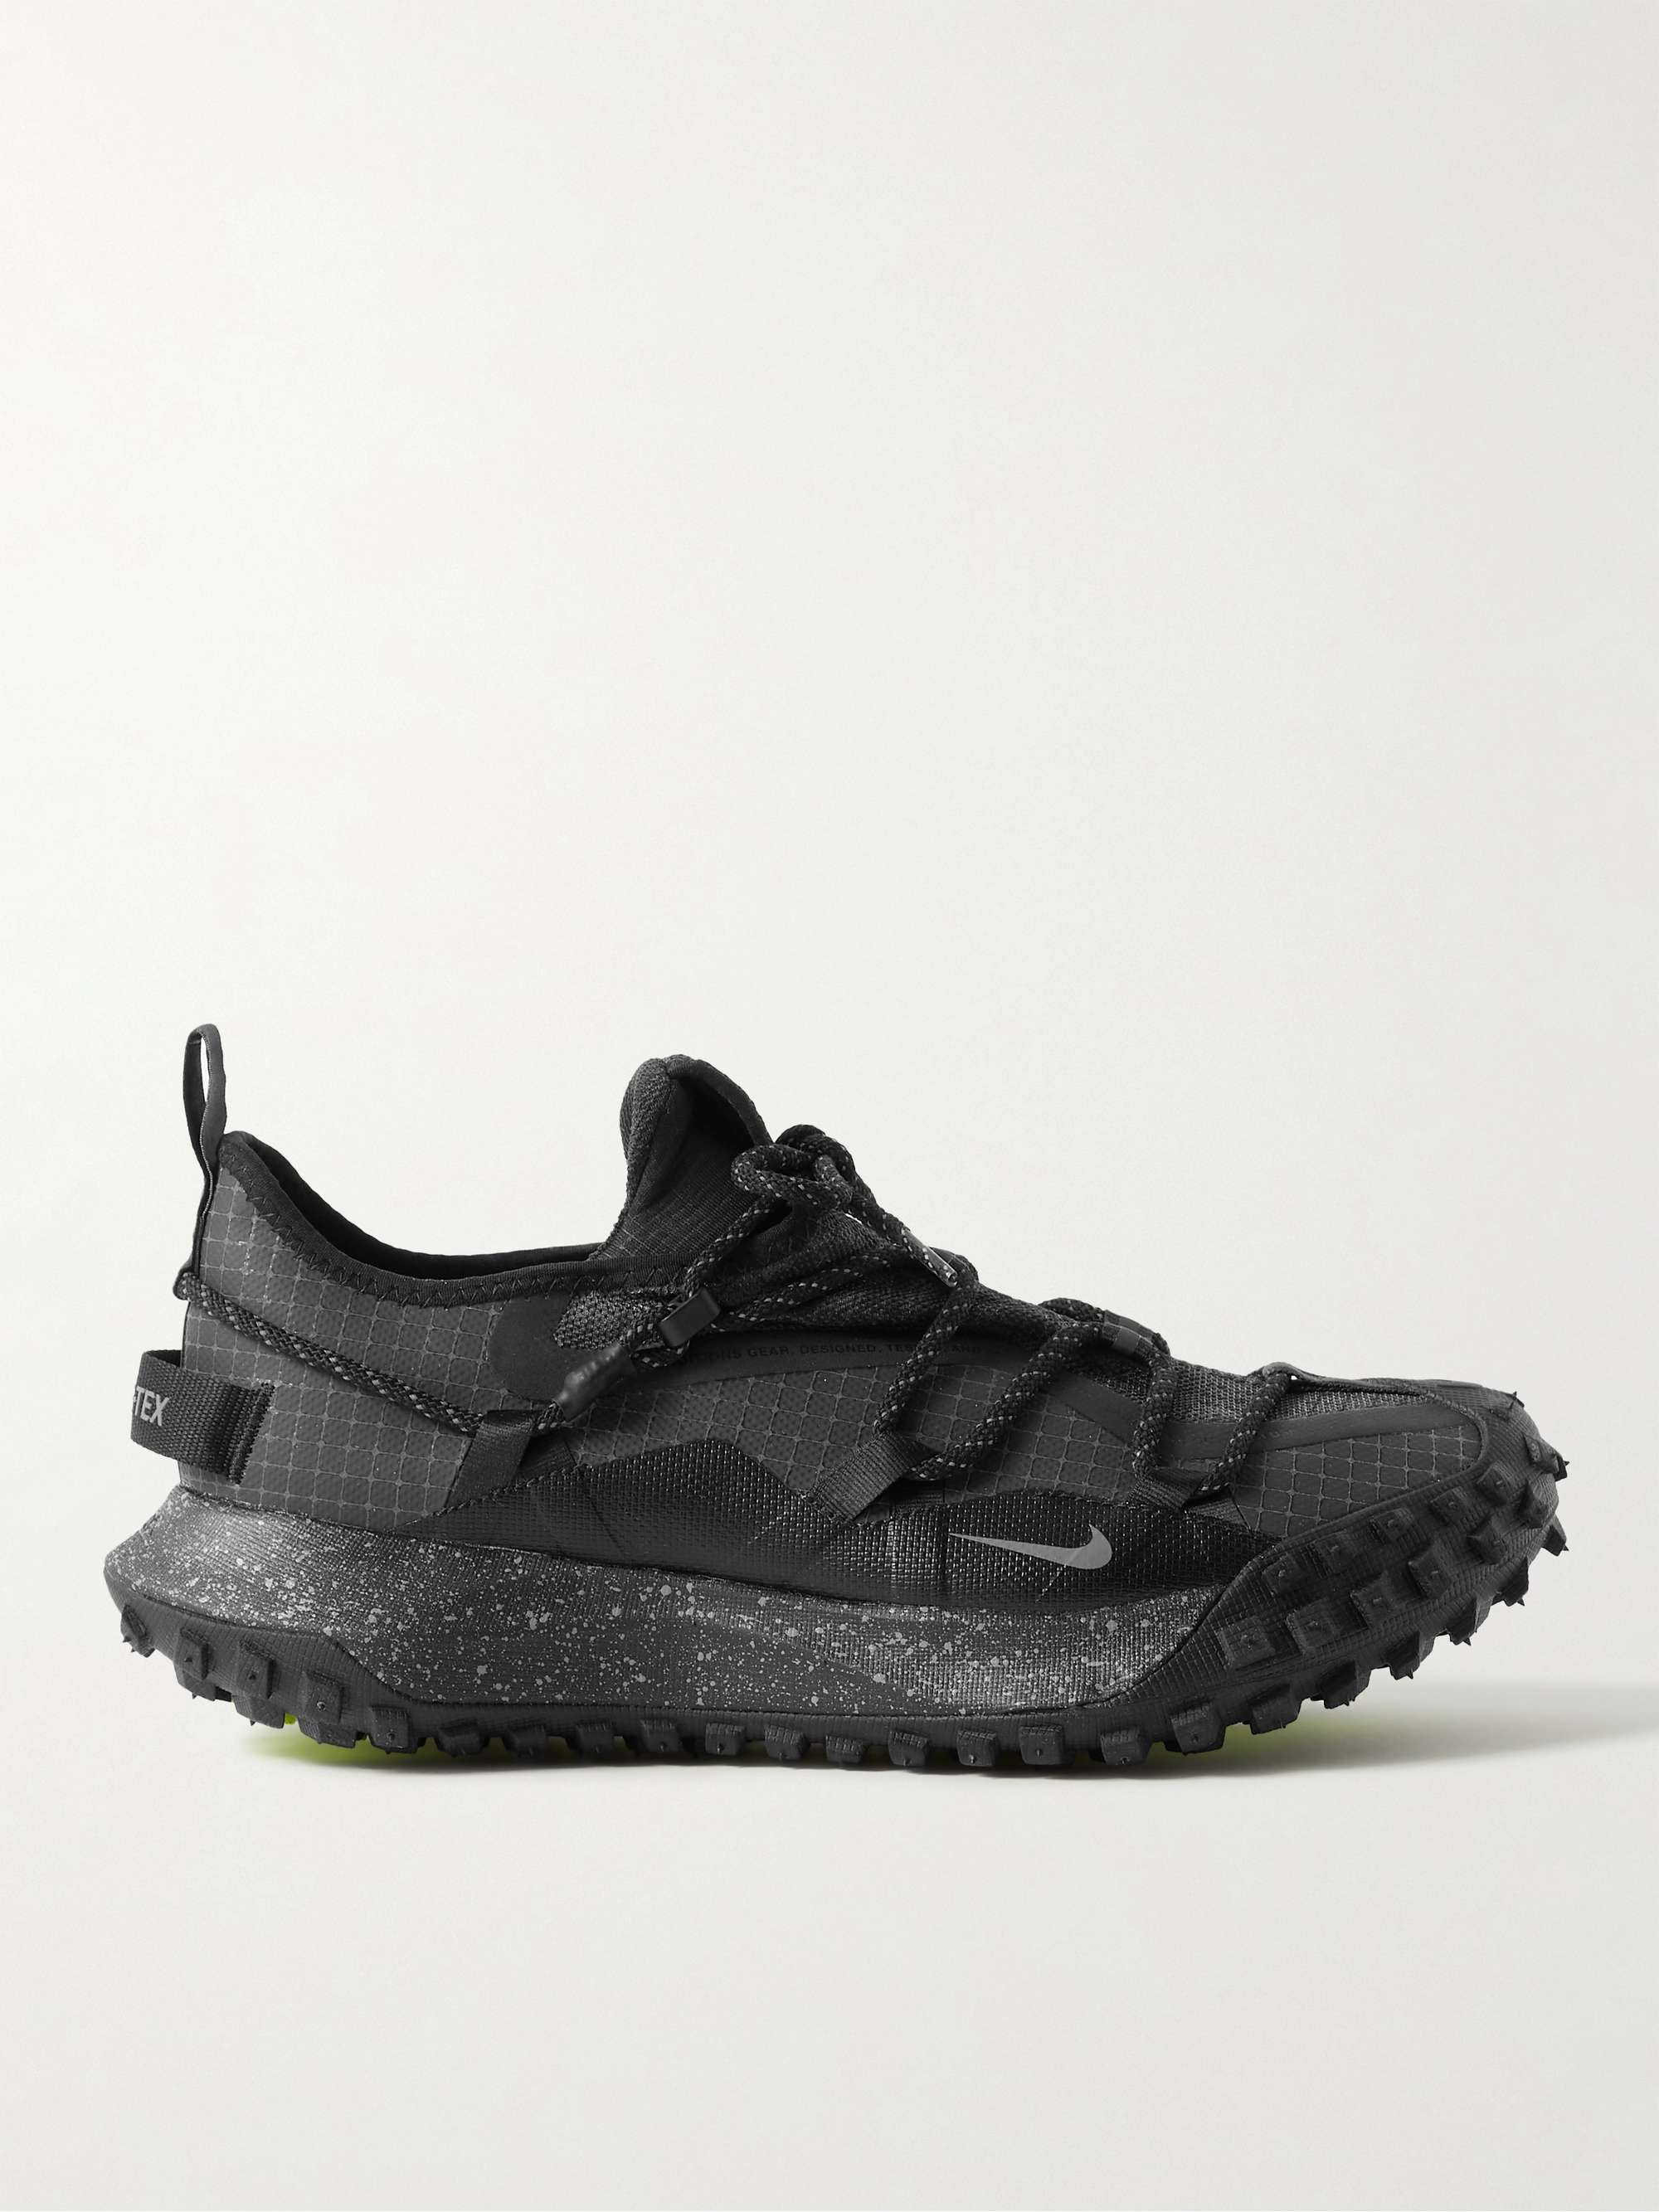 NIKE ACG Mountain Fly Rubber-Trimmed GORE-TEX Sneakers | MR PORTER